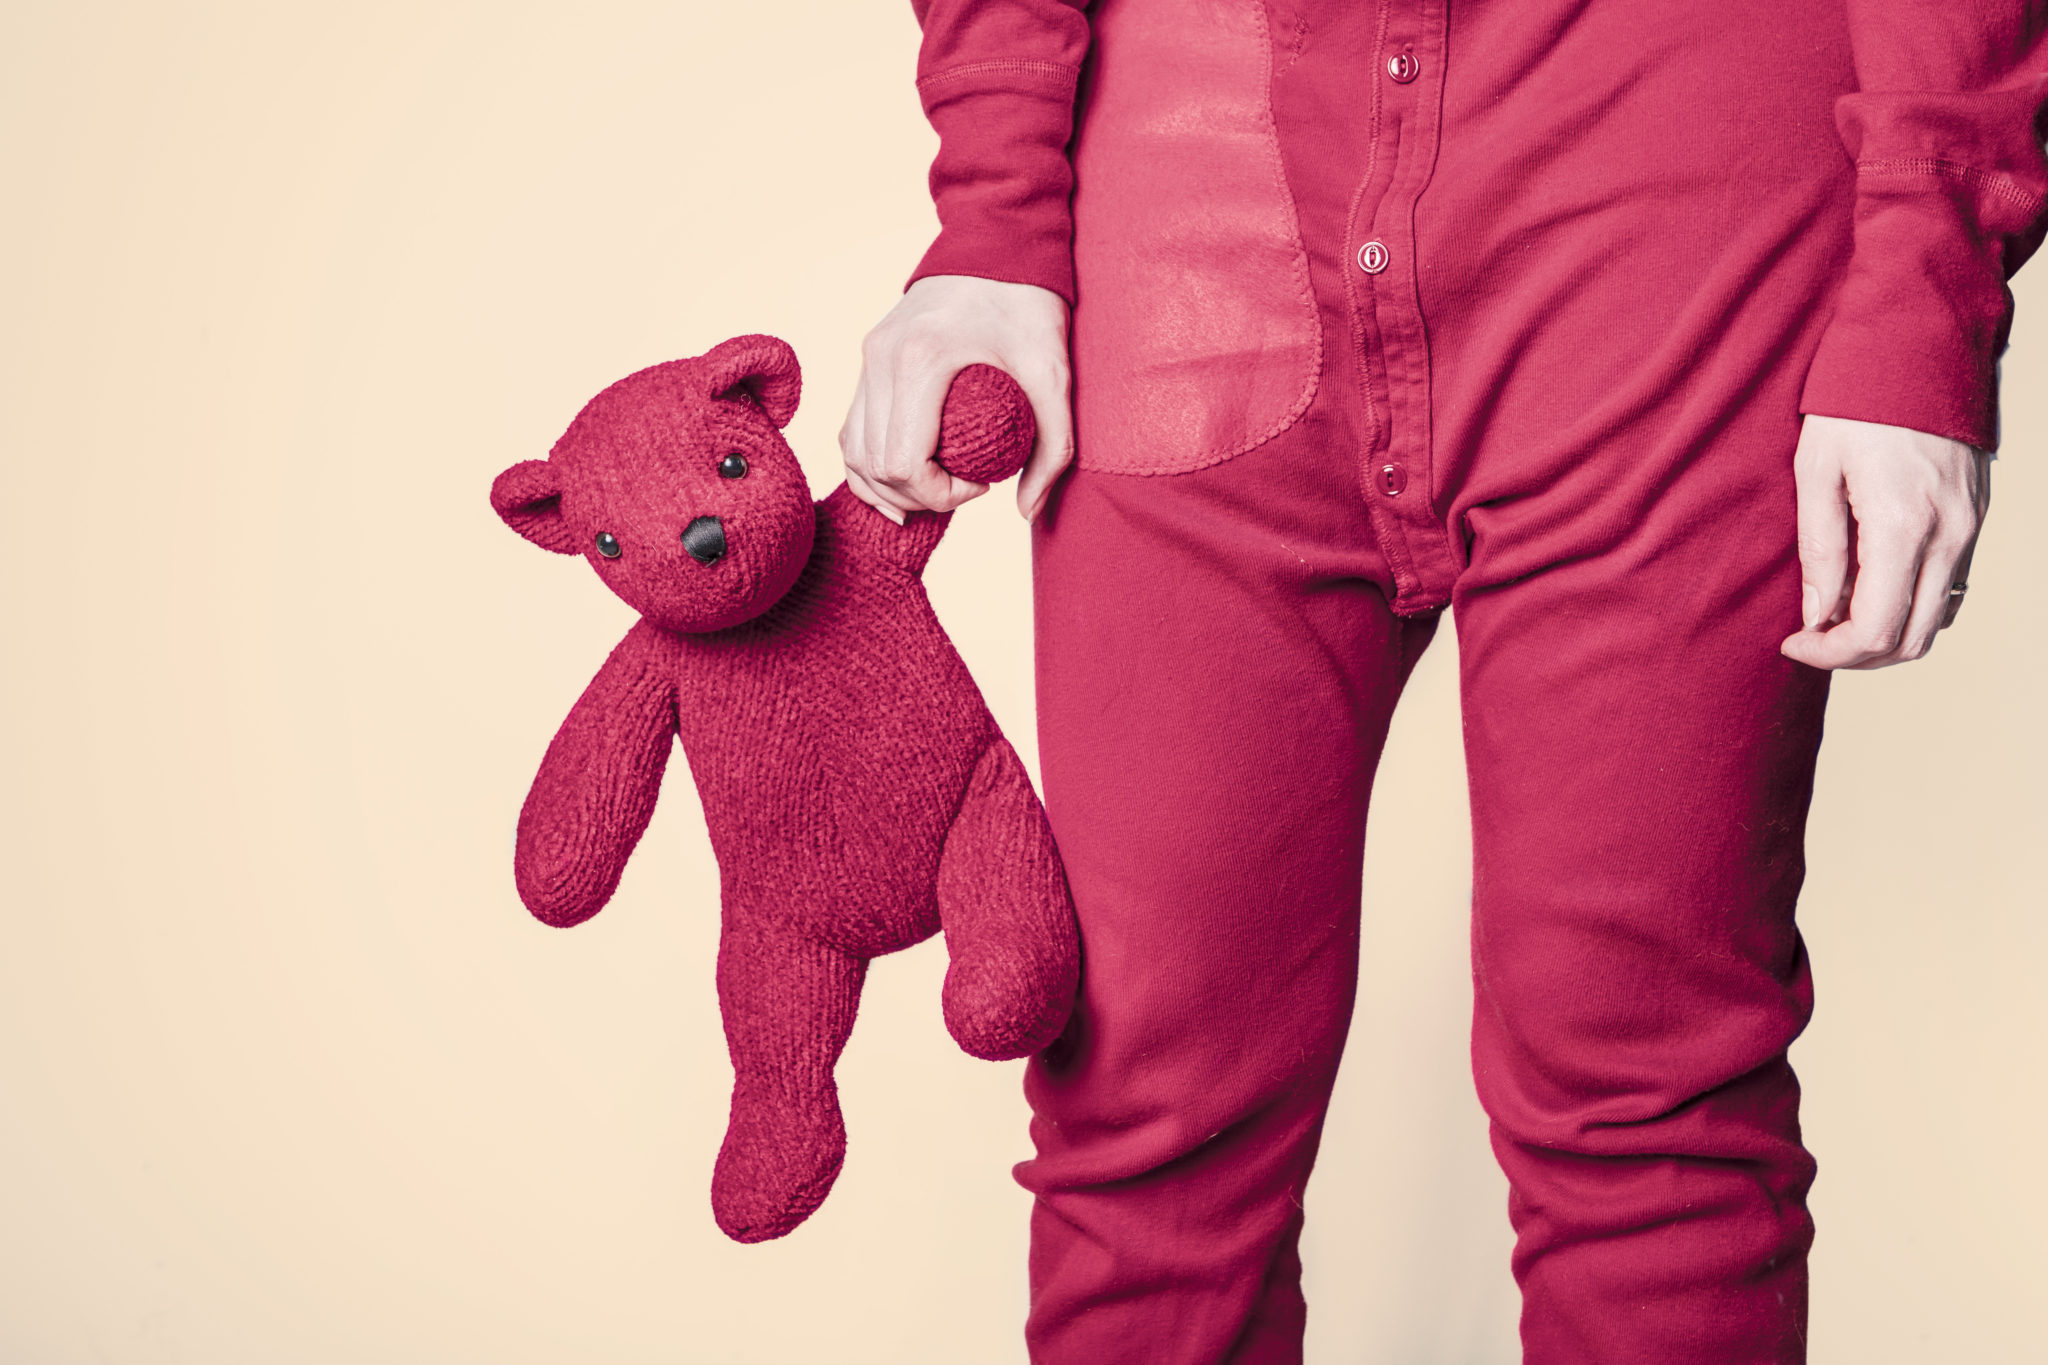 A person in a pair of red pajamas holds a red teddy bear by its paw